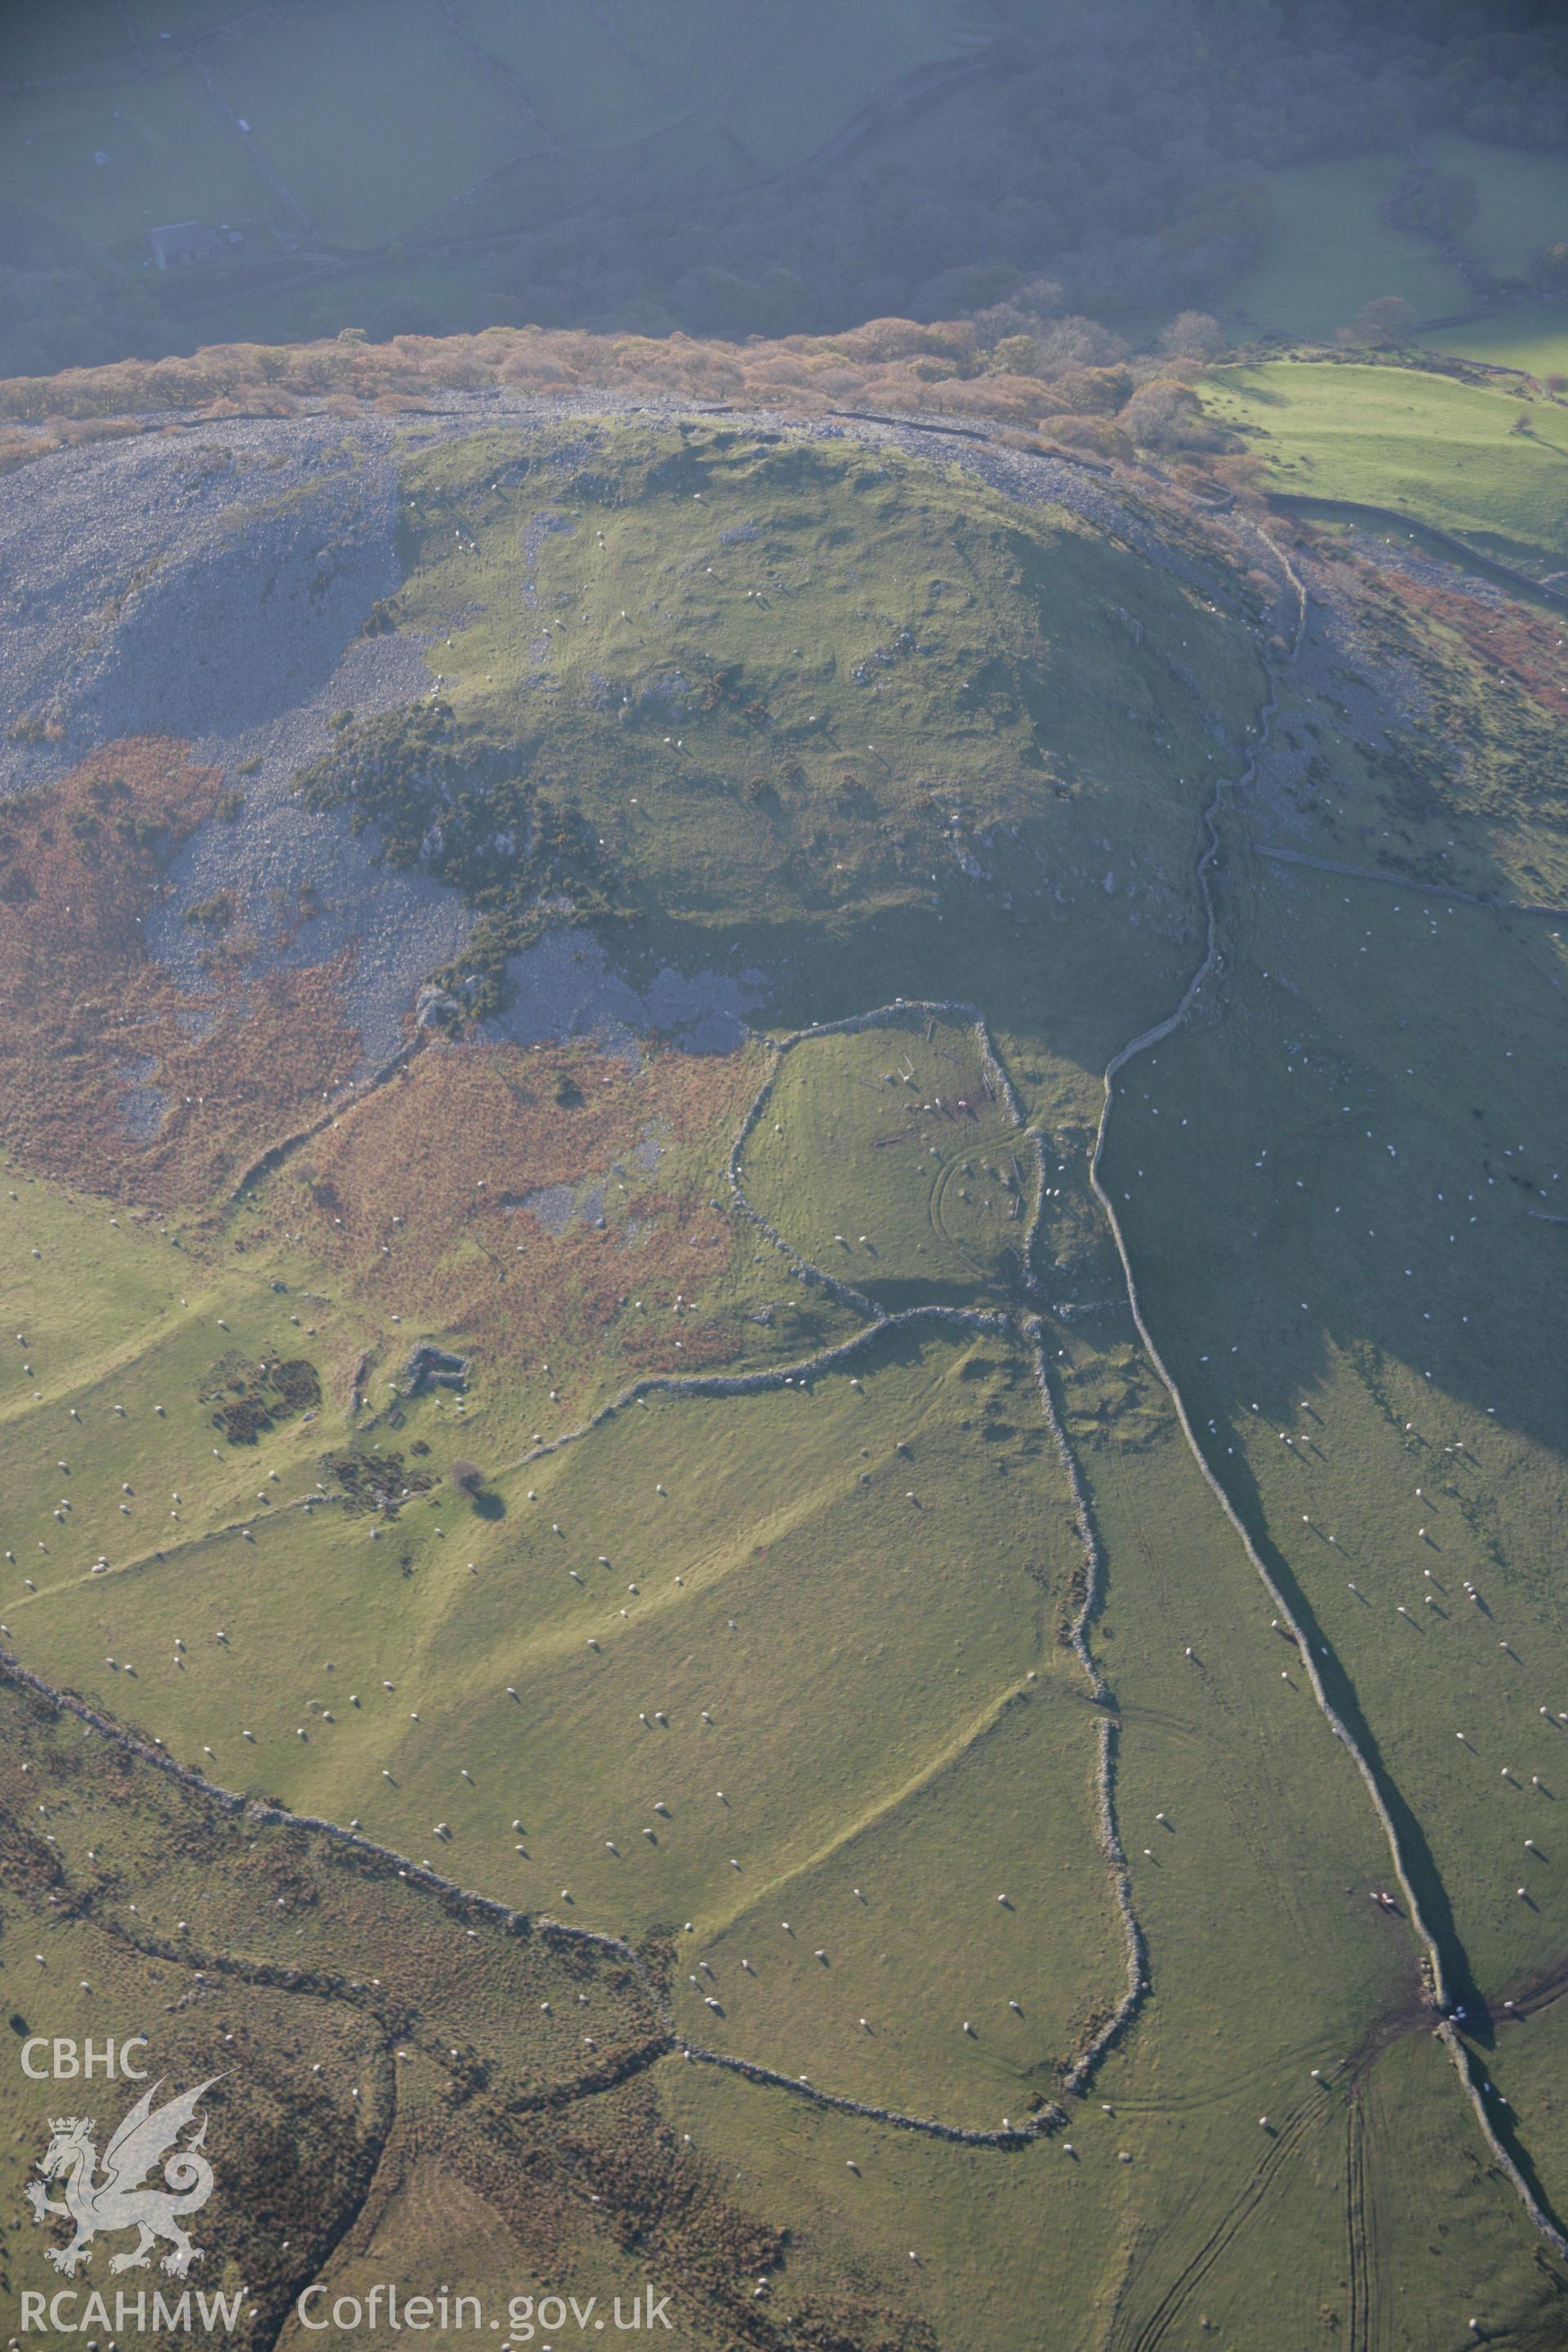 RCAHMW colour oblique aerial photograph of Dinas, Llanfairfechan, from the north-east. Taken on 21 November 2005 by Toby Driver